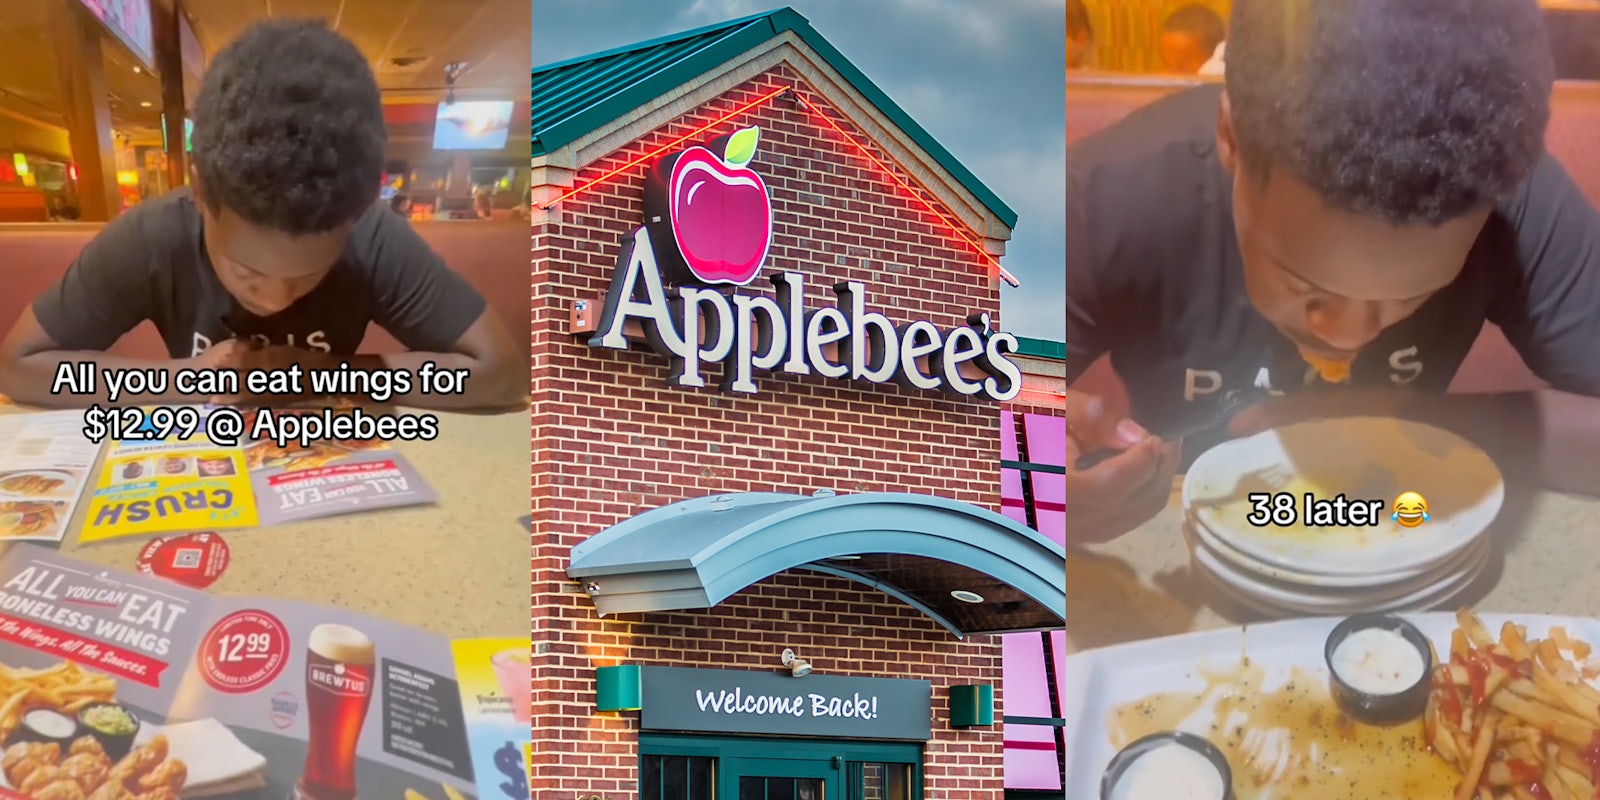 Applebee's customers barely make it through 50 wings during $12.99 all-you-can-eat special